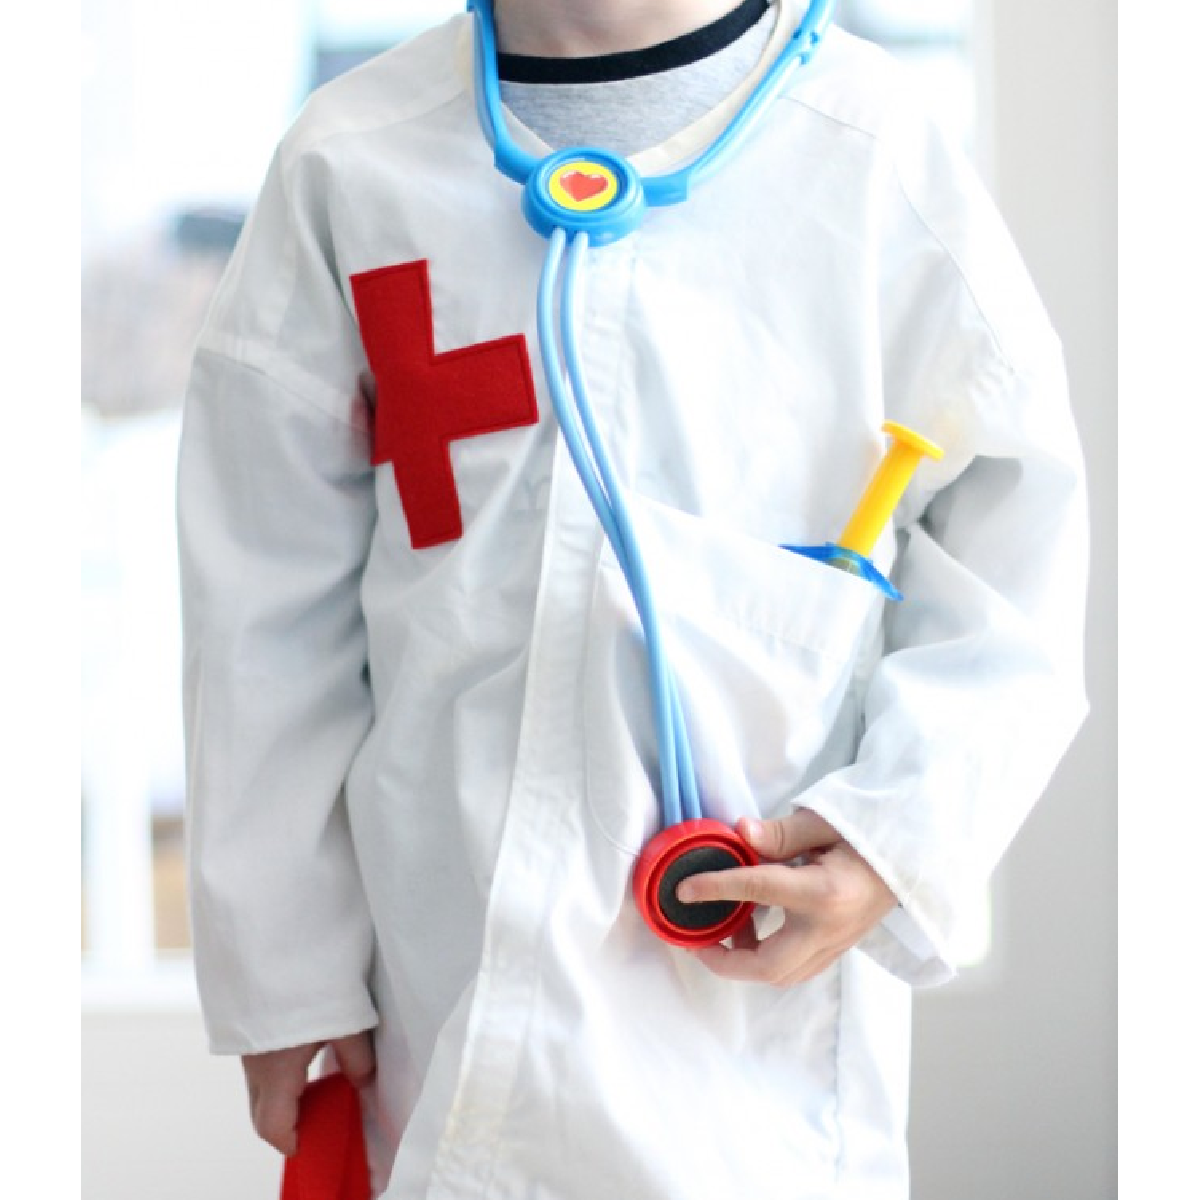 Dress up ideas- doctors coat made from shirt with red cross and equipment- kids activities blog